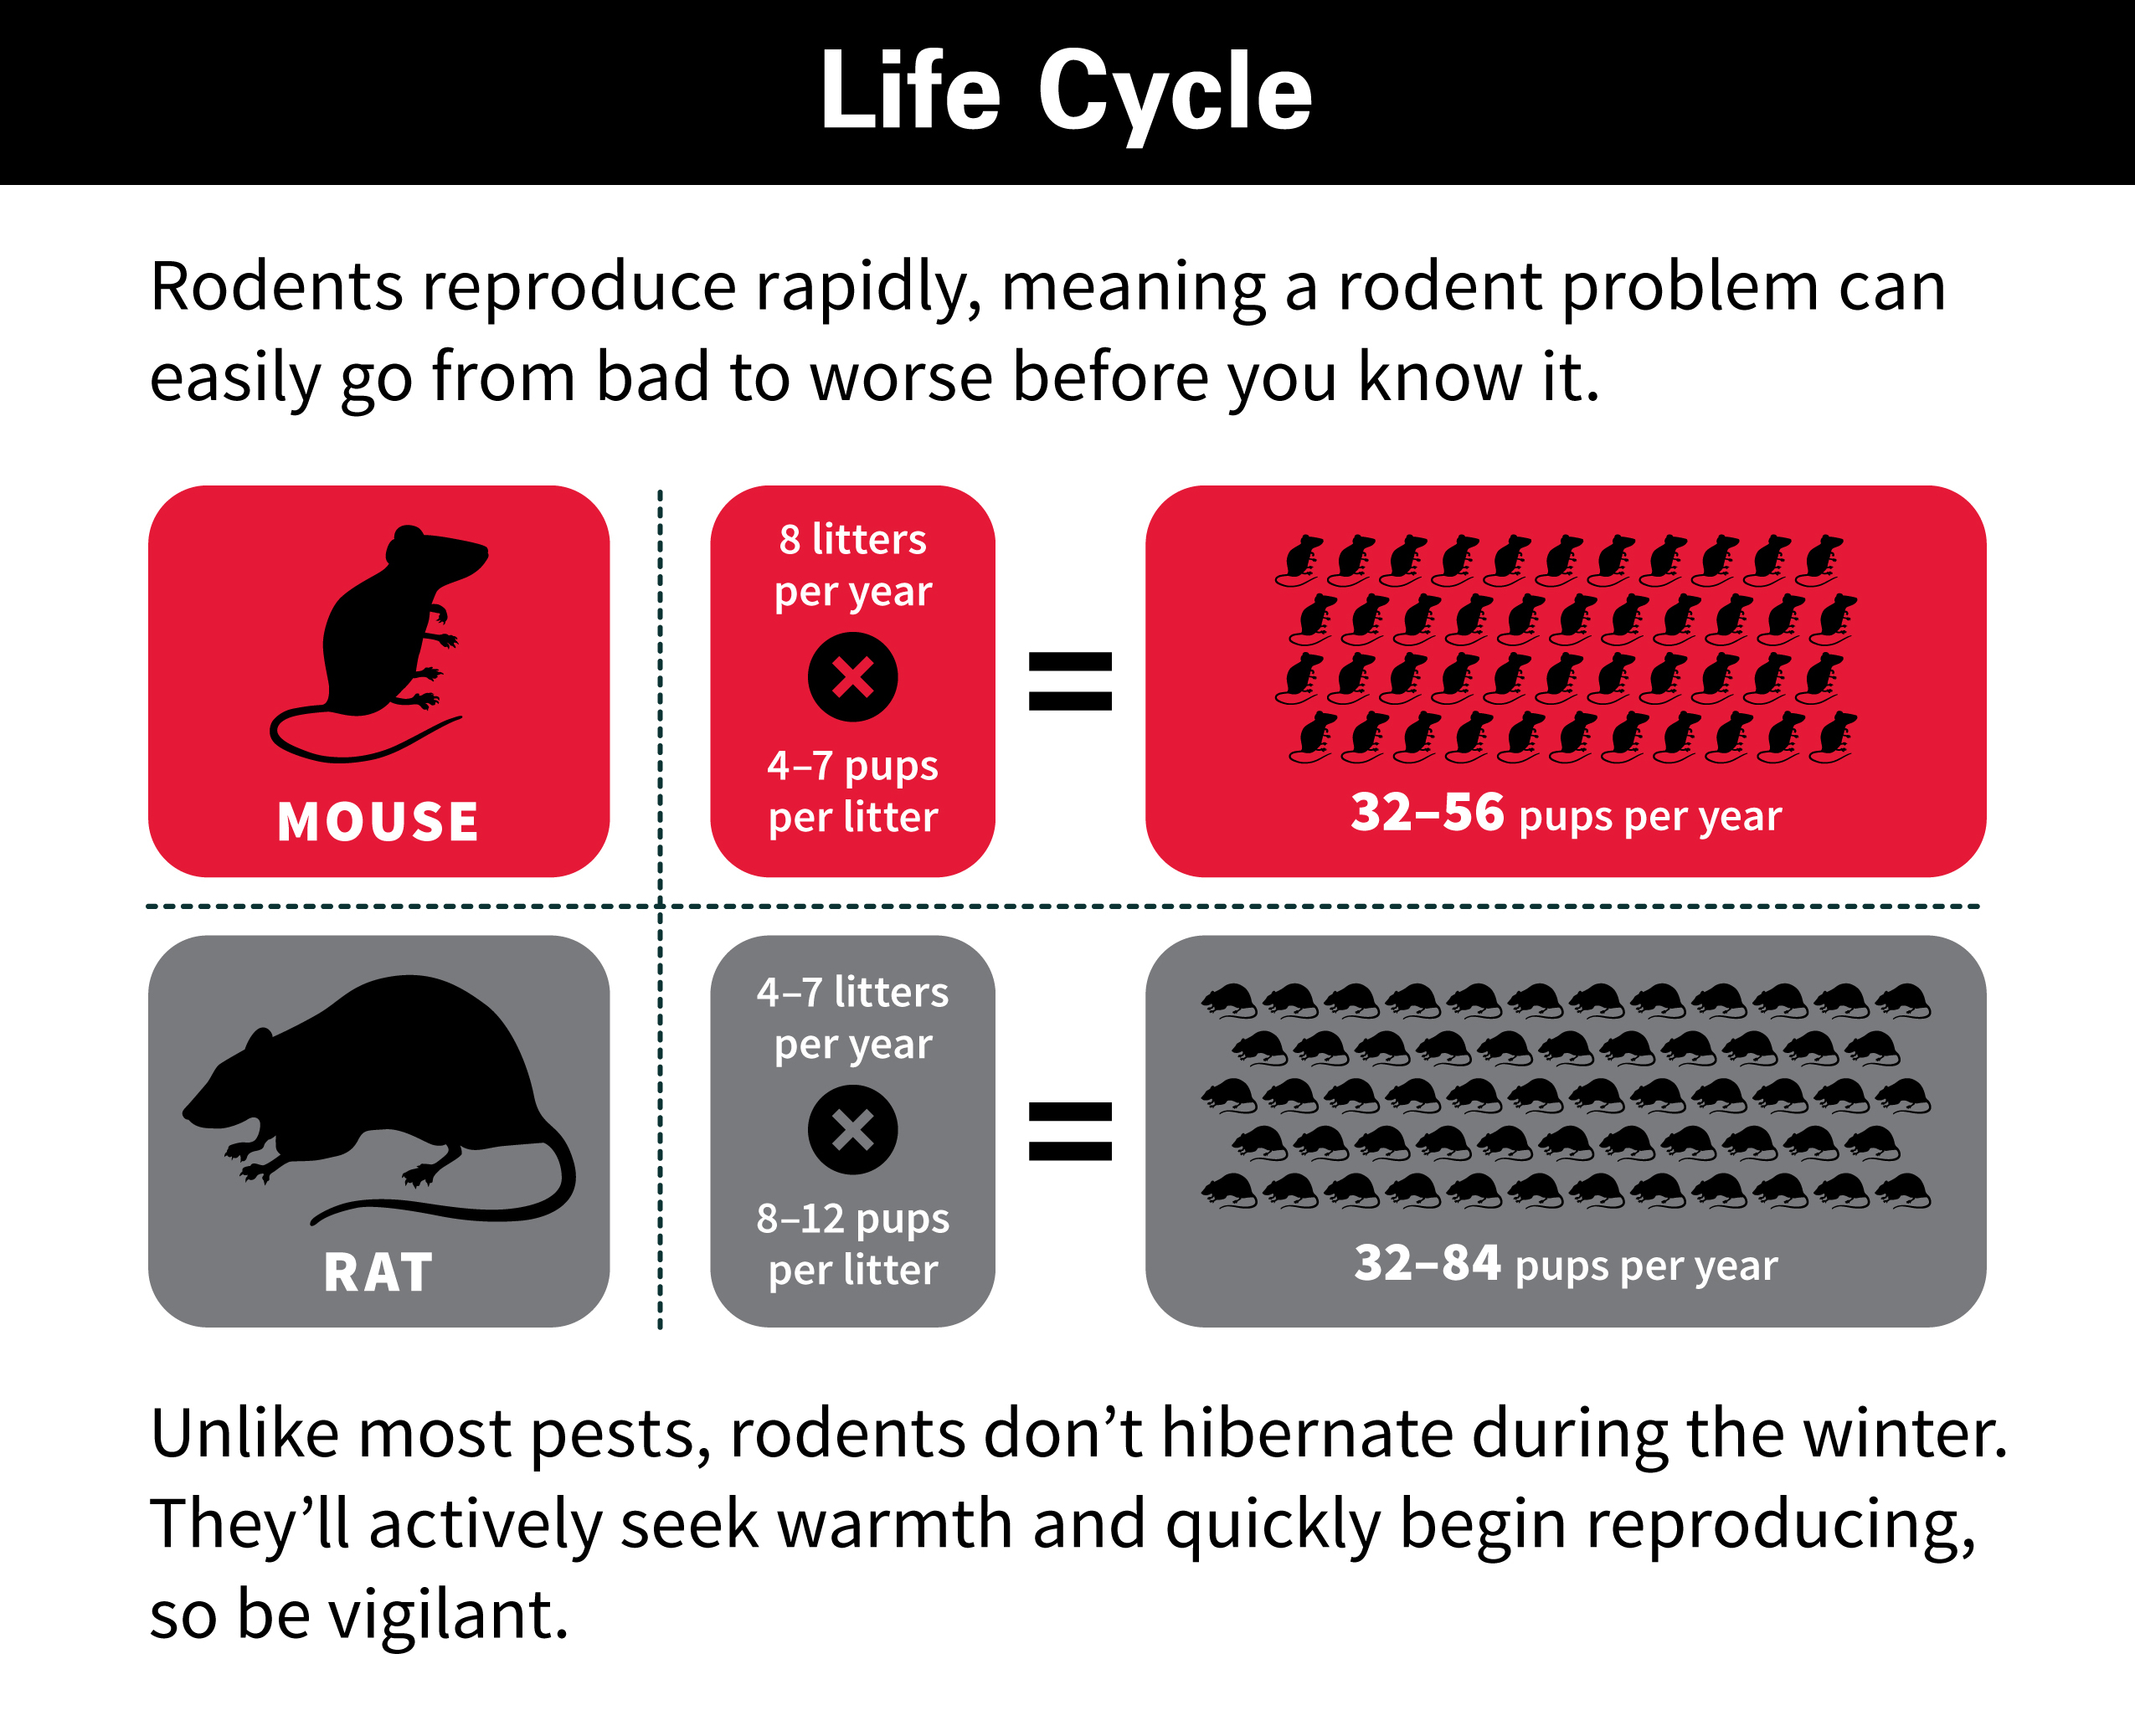 mice rodent control orkin pest cycle rats rodents chart rid rockford mouse reproduction rate wanted facts ways enlarge its dies